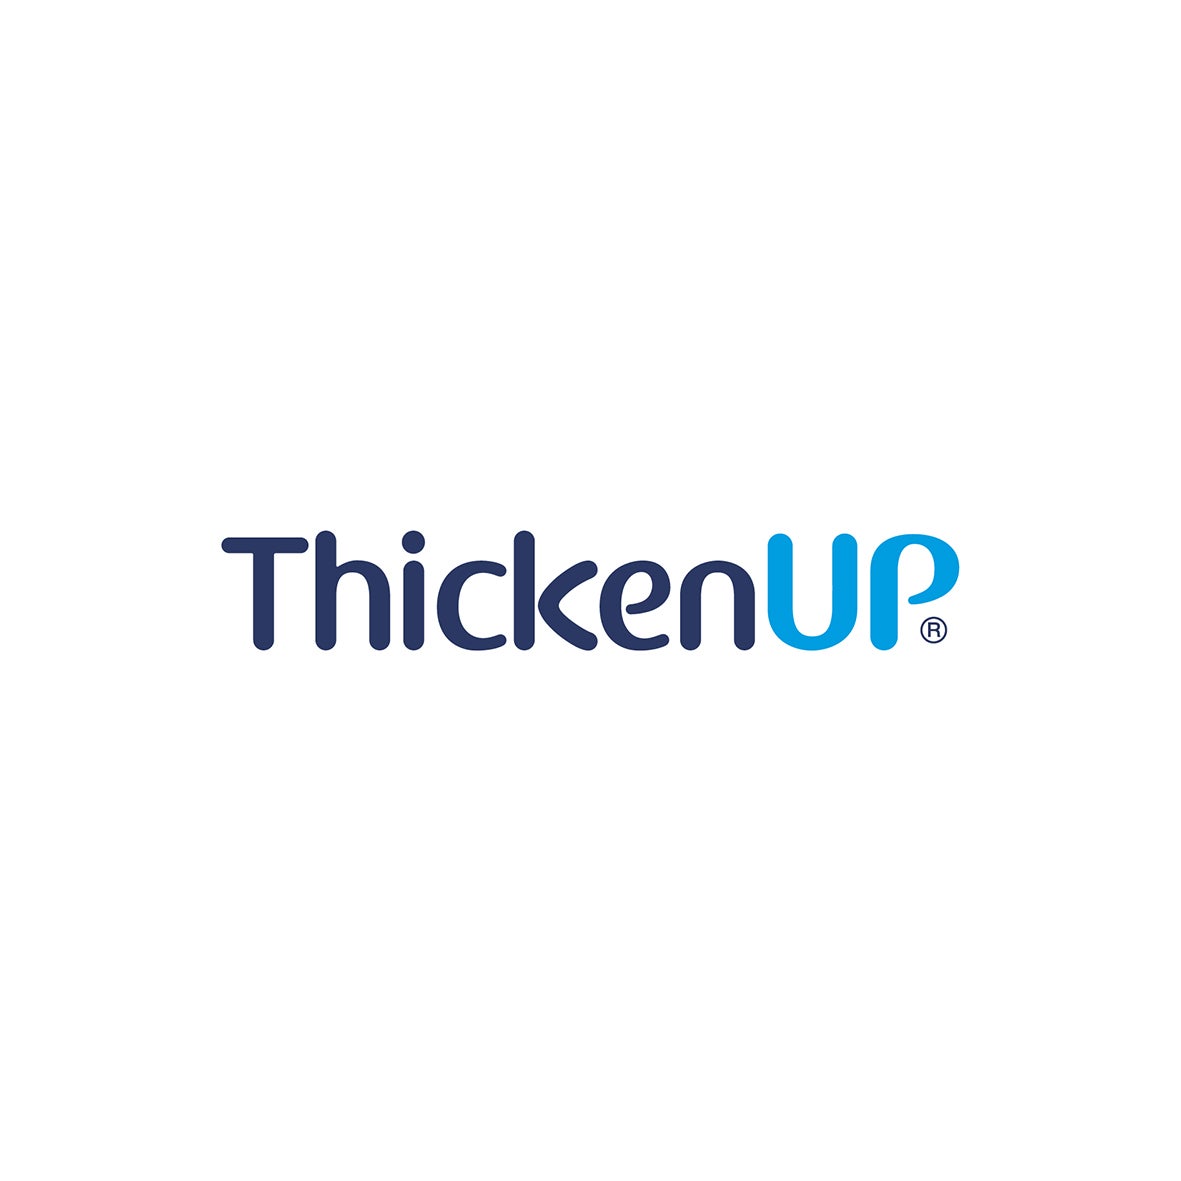 NHSc_Logos_ThickenUp